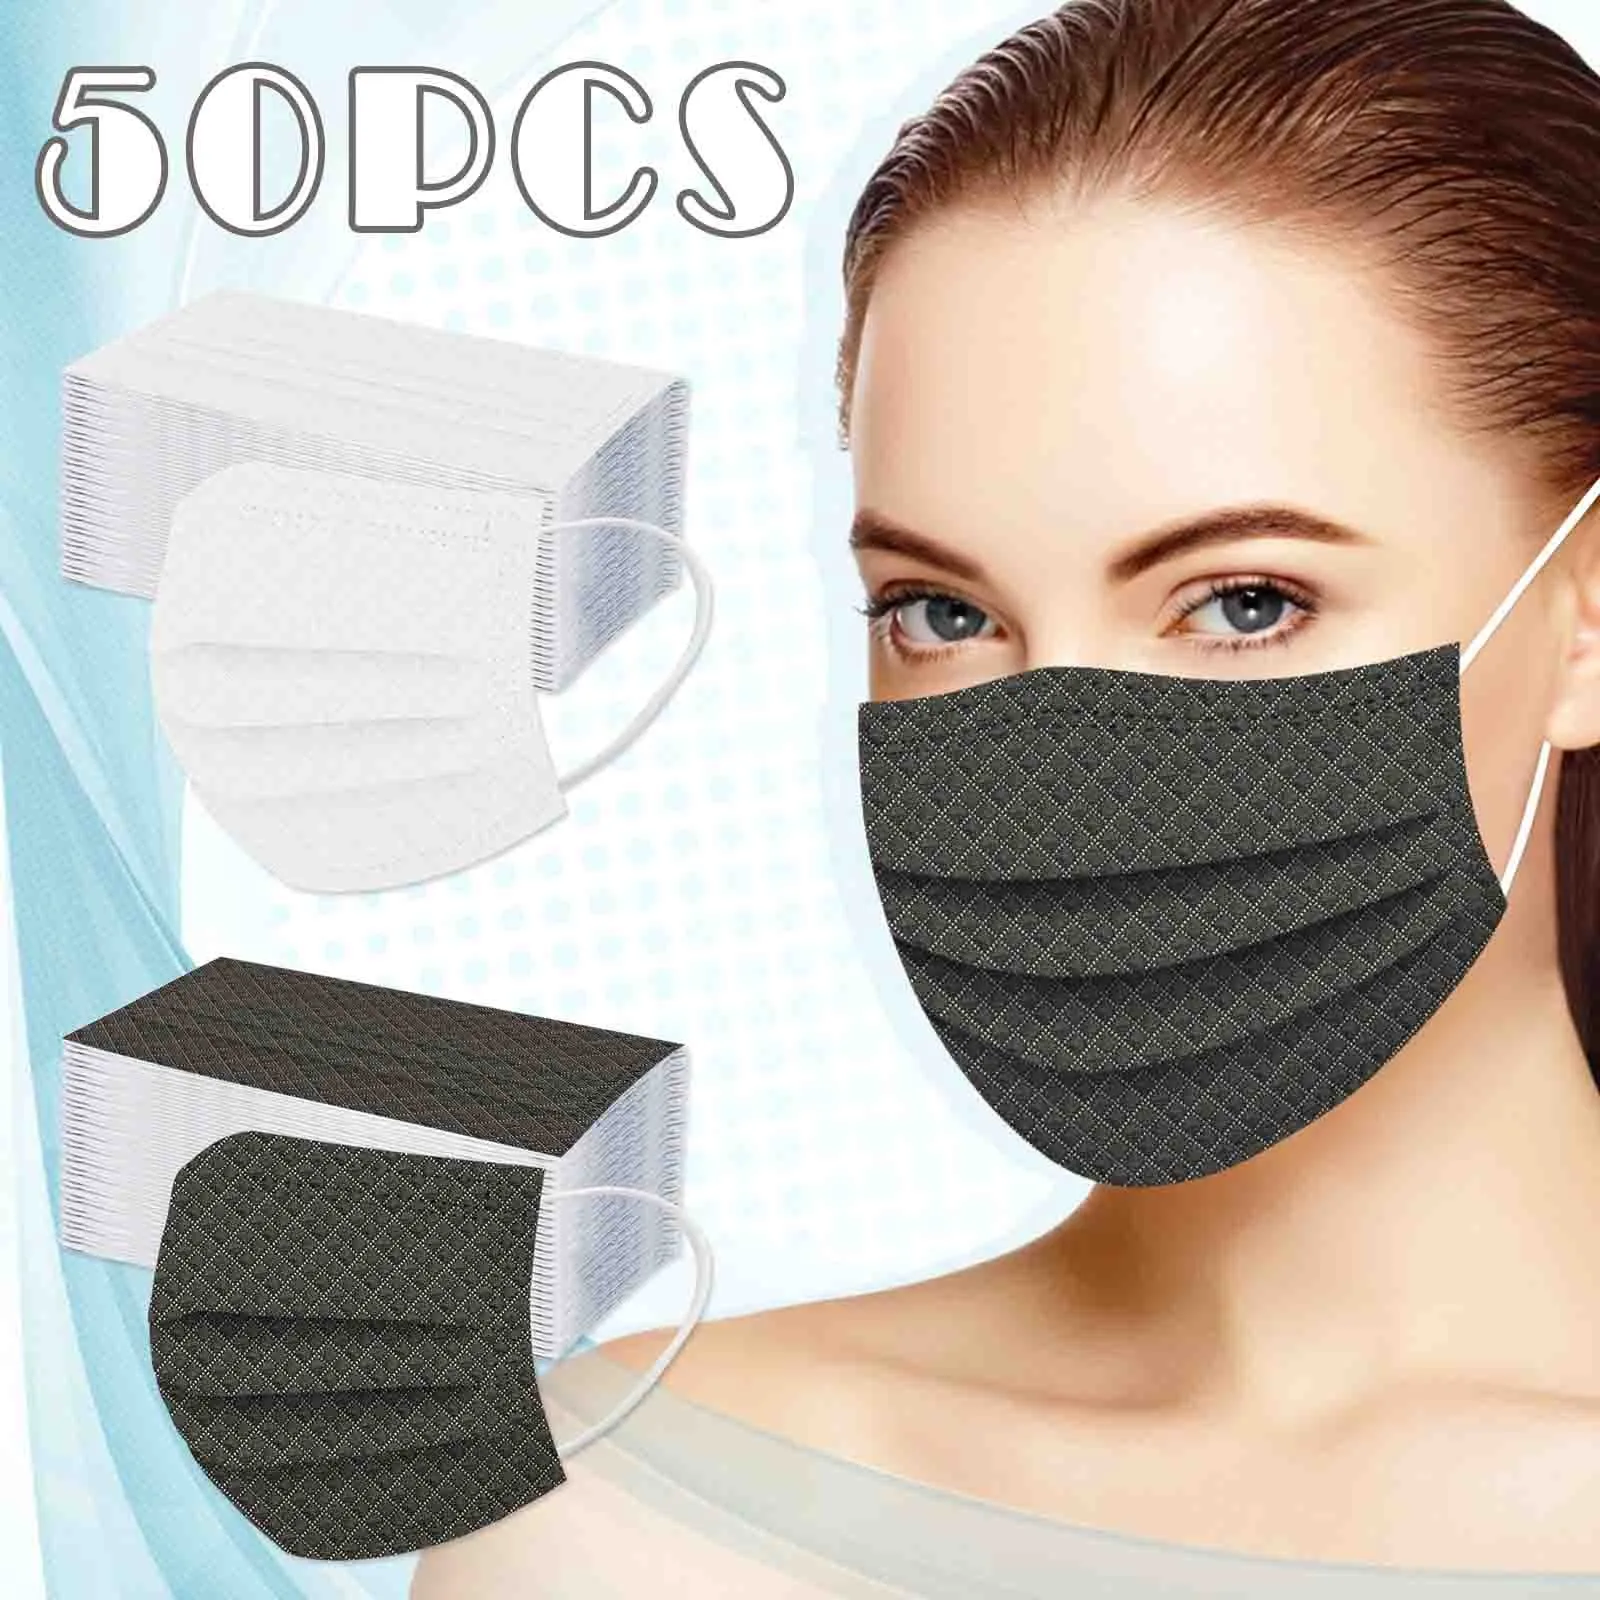 halloween costumes for adults 50pcs Adult Solid Plaid Shade Disposable Face Mask 3 Ply Earloop Masks Halloween Cosplay Маска Для Лица Masque Visage Mascaras all black halloween costumes